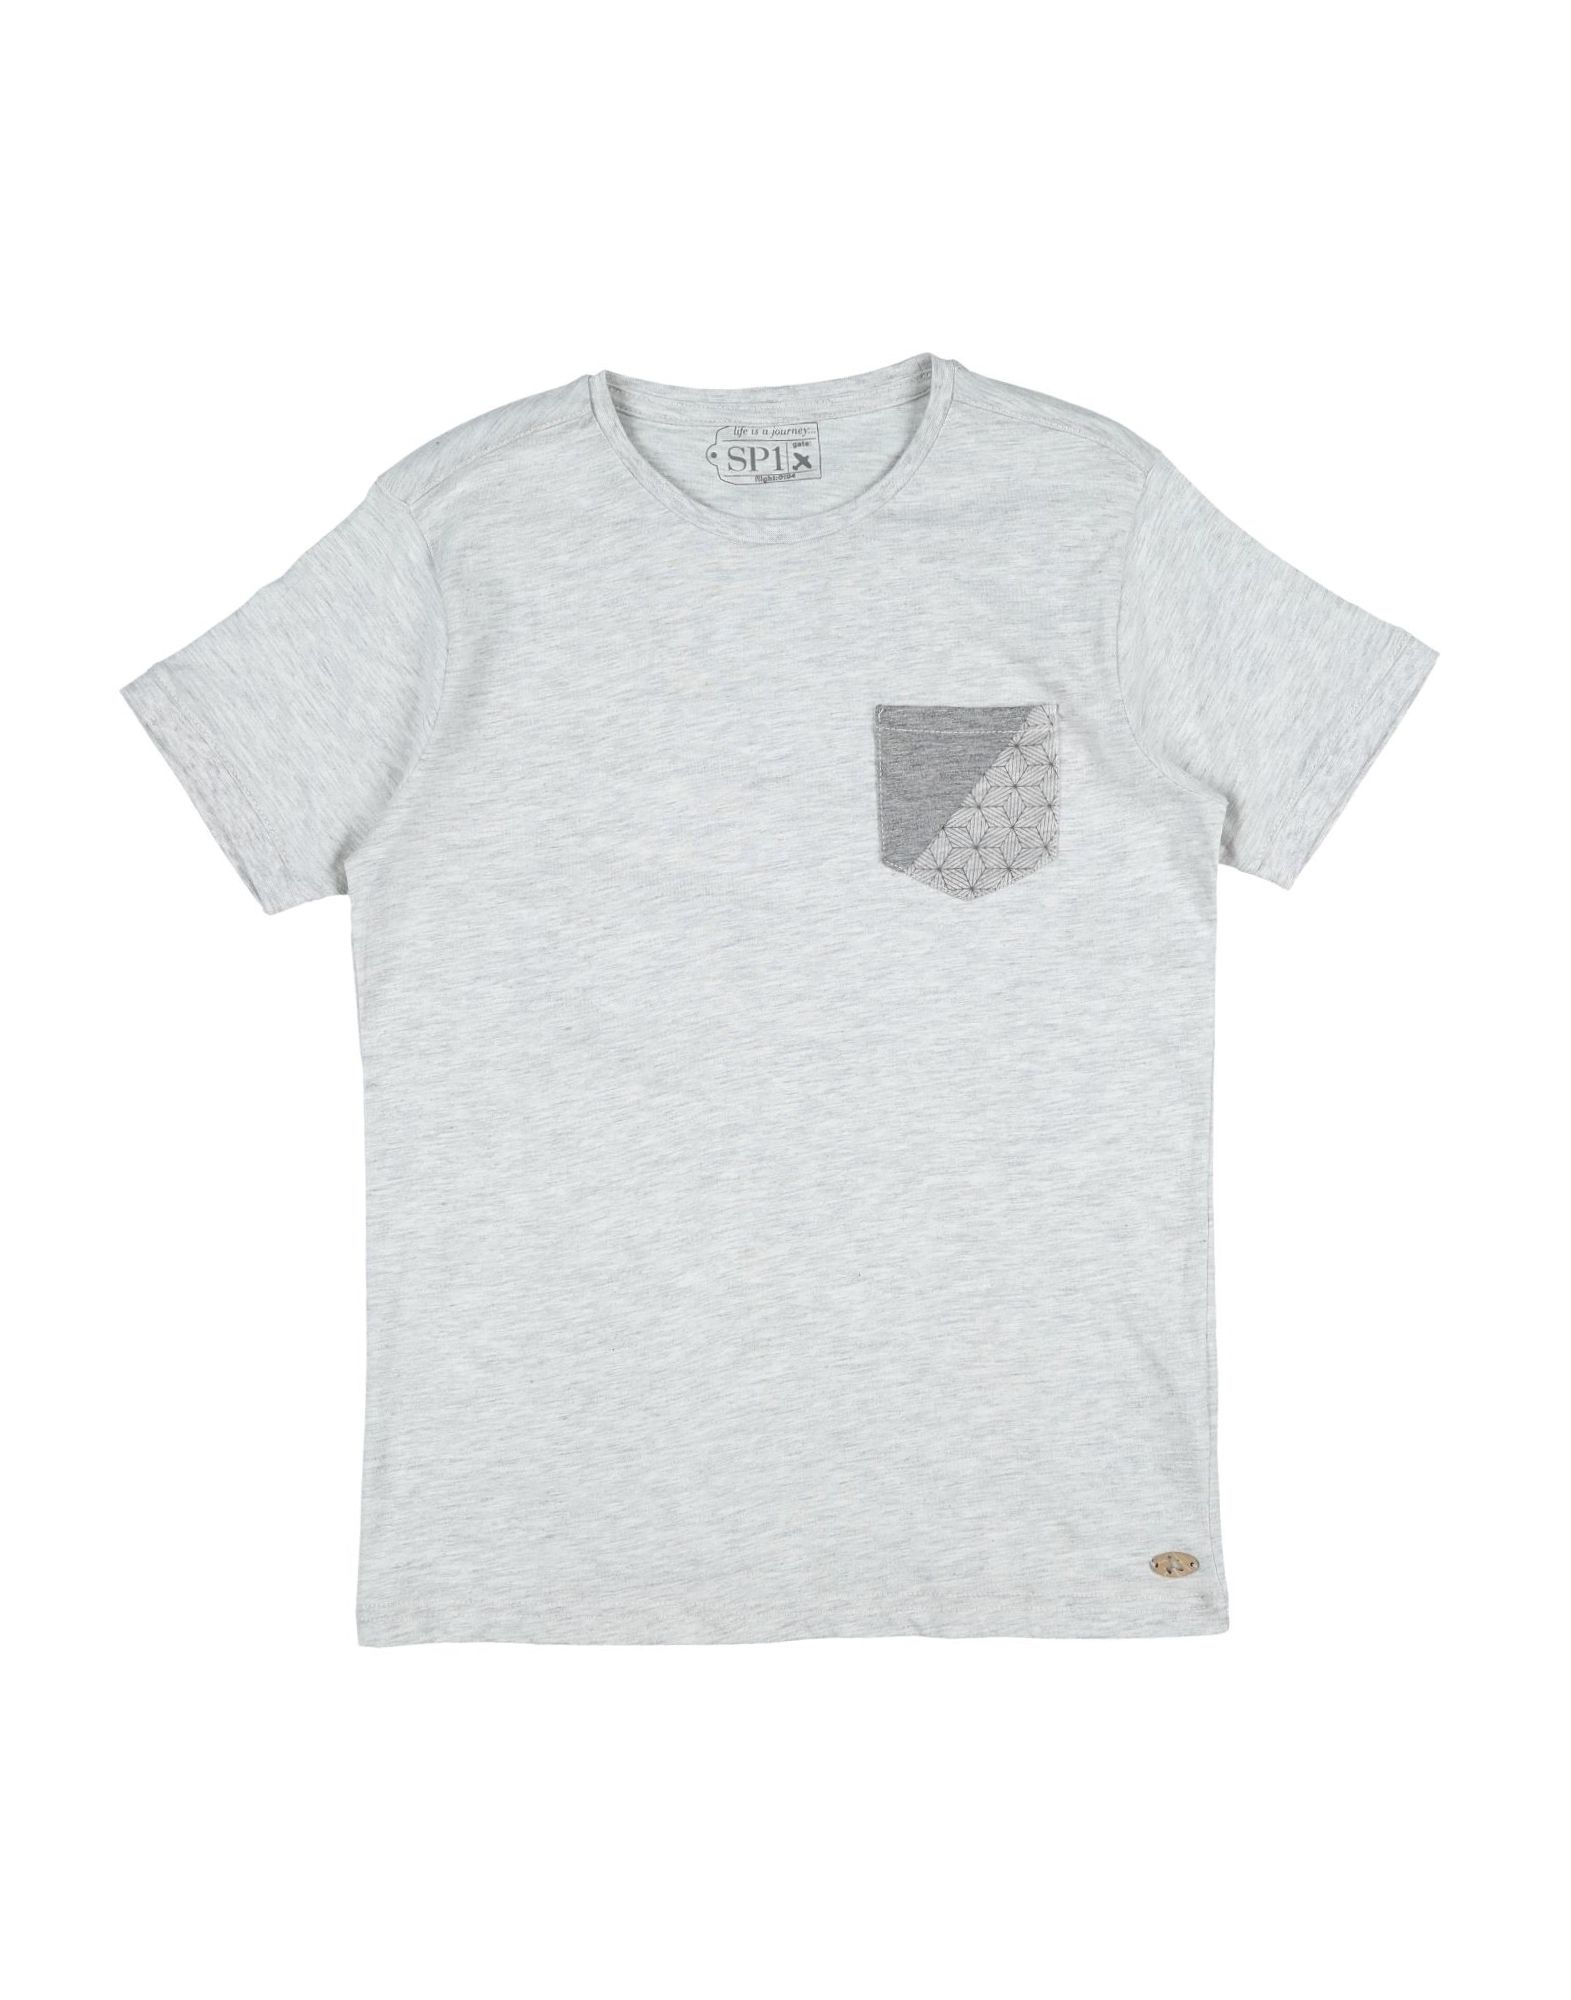 Sp1 Kids' T-shirts In Light Grey